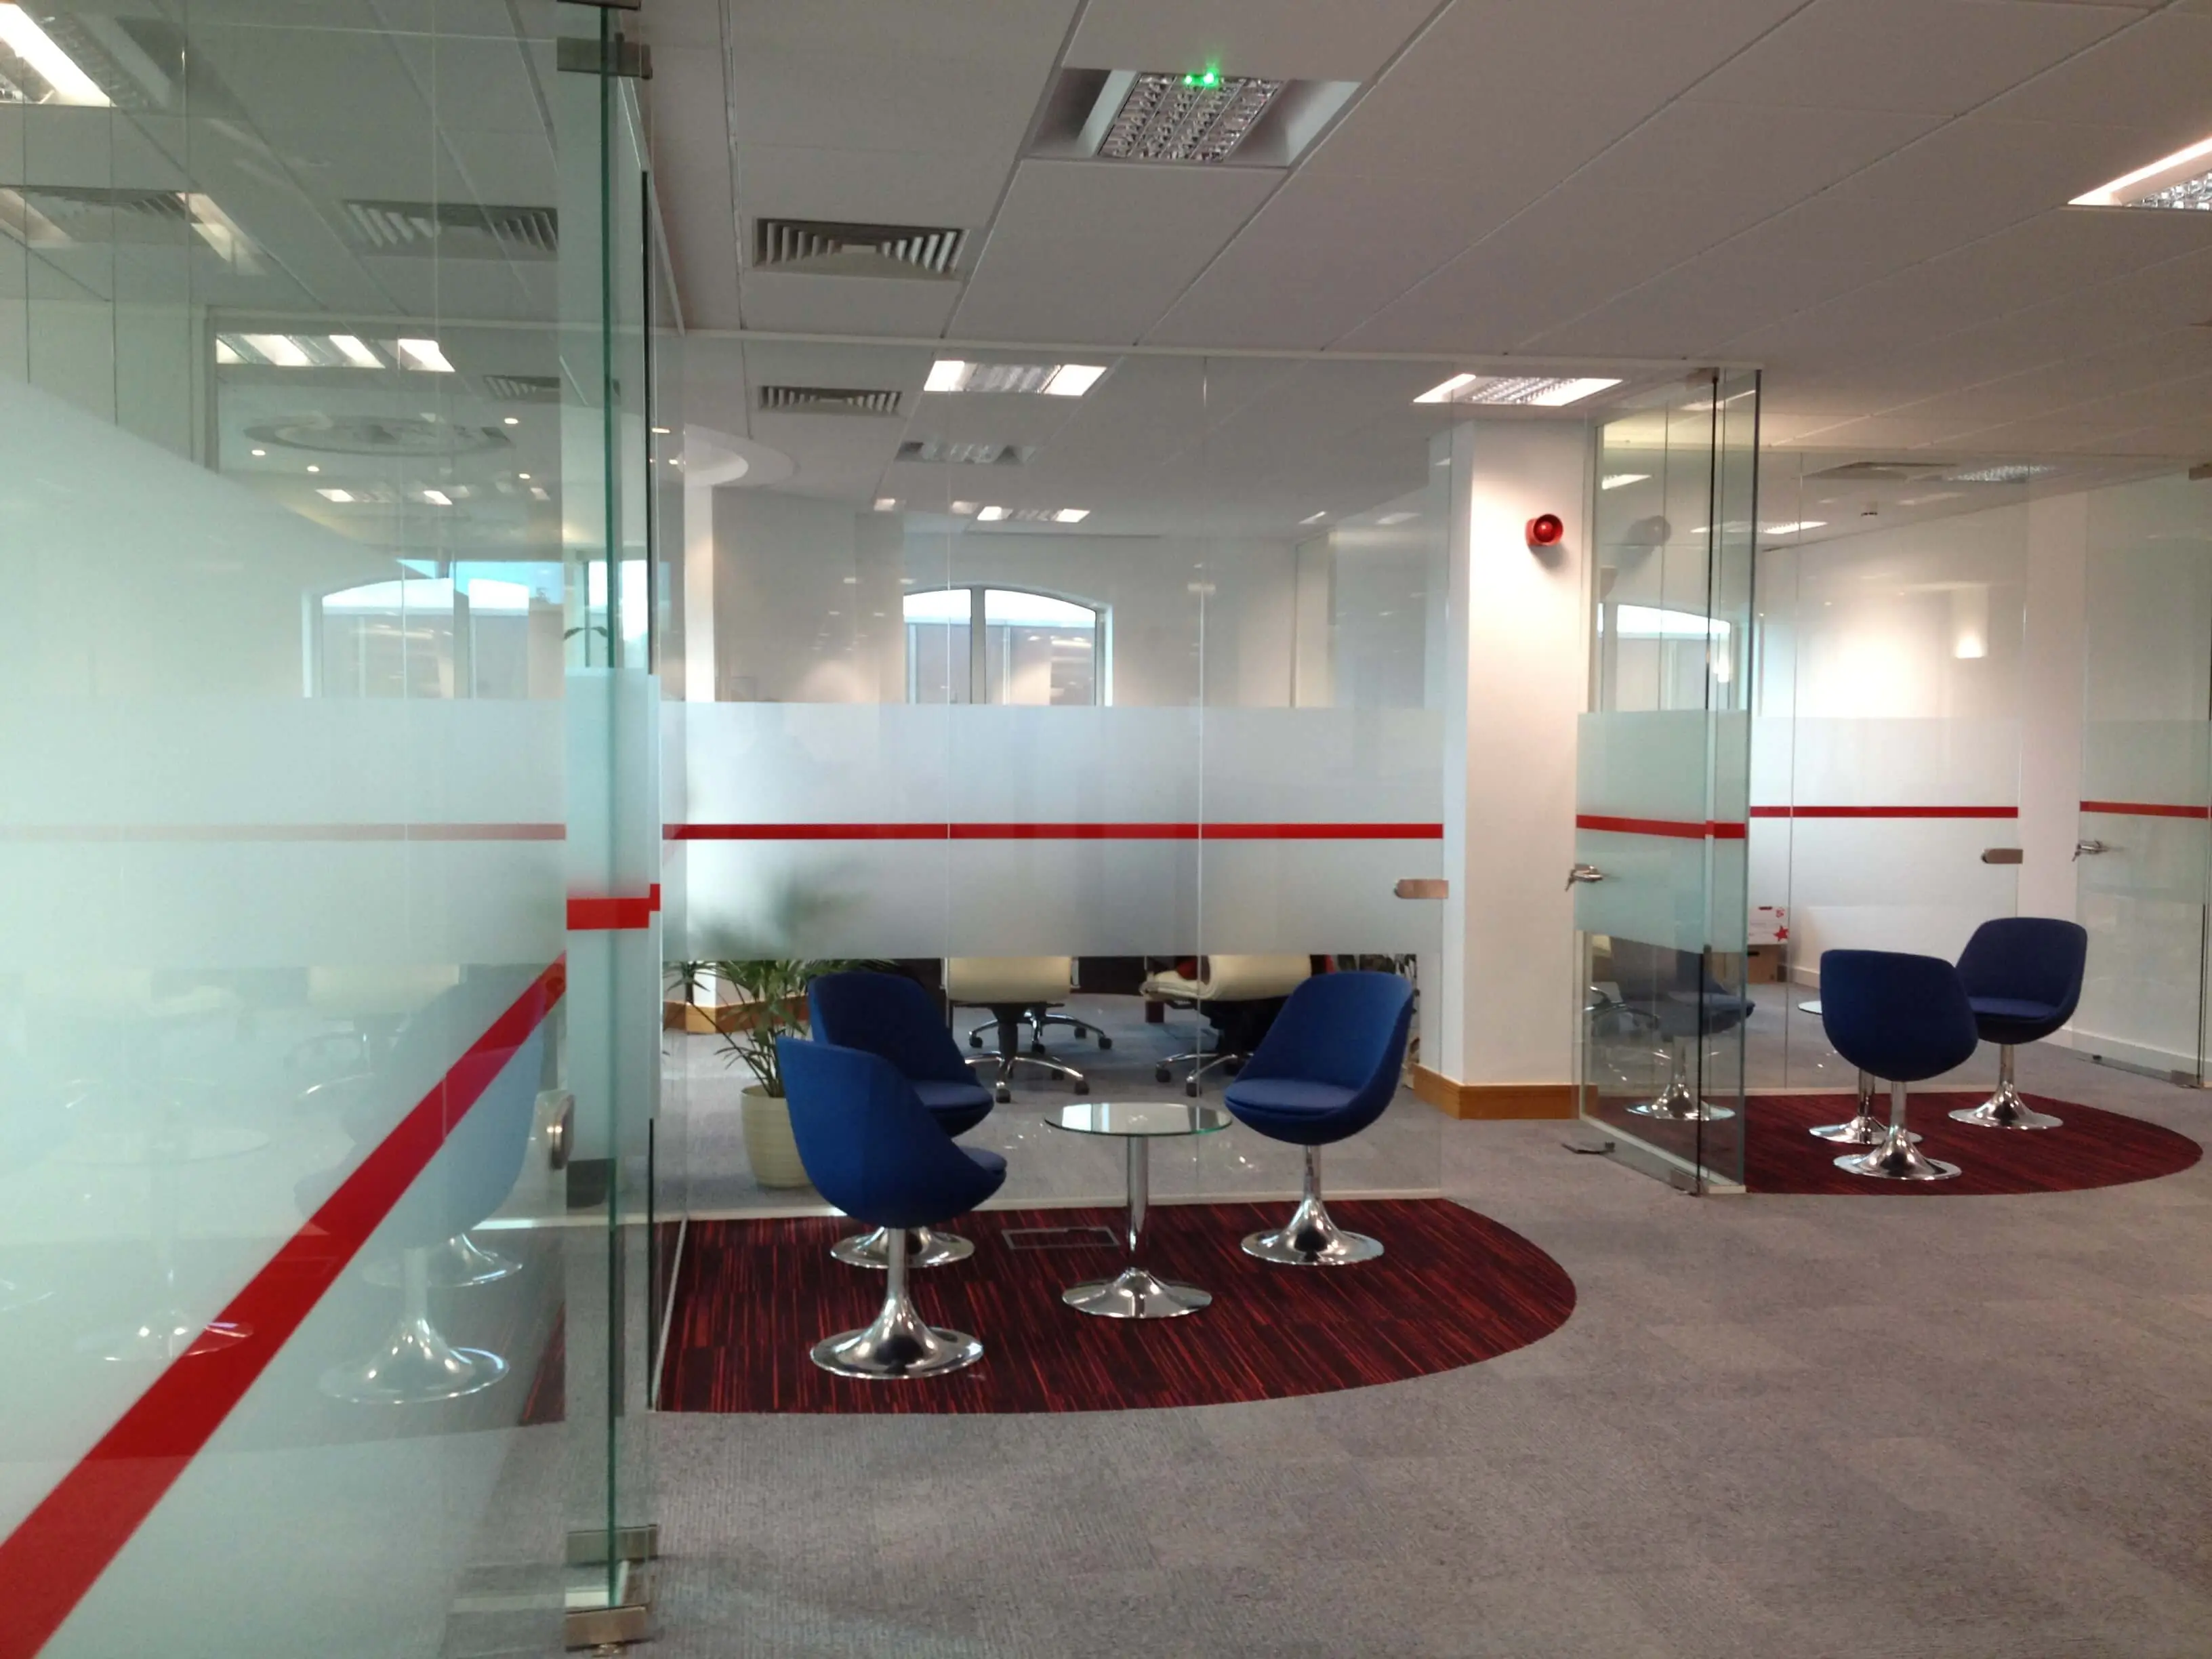 Waiting chairs coffee tables and glass partitions in office space